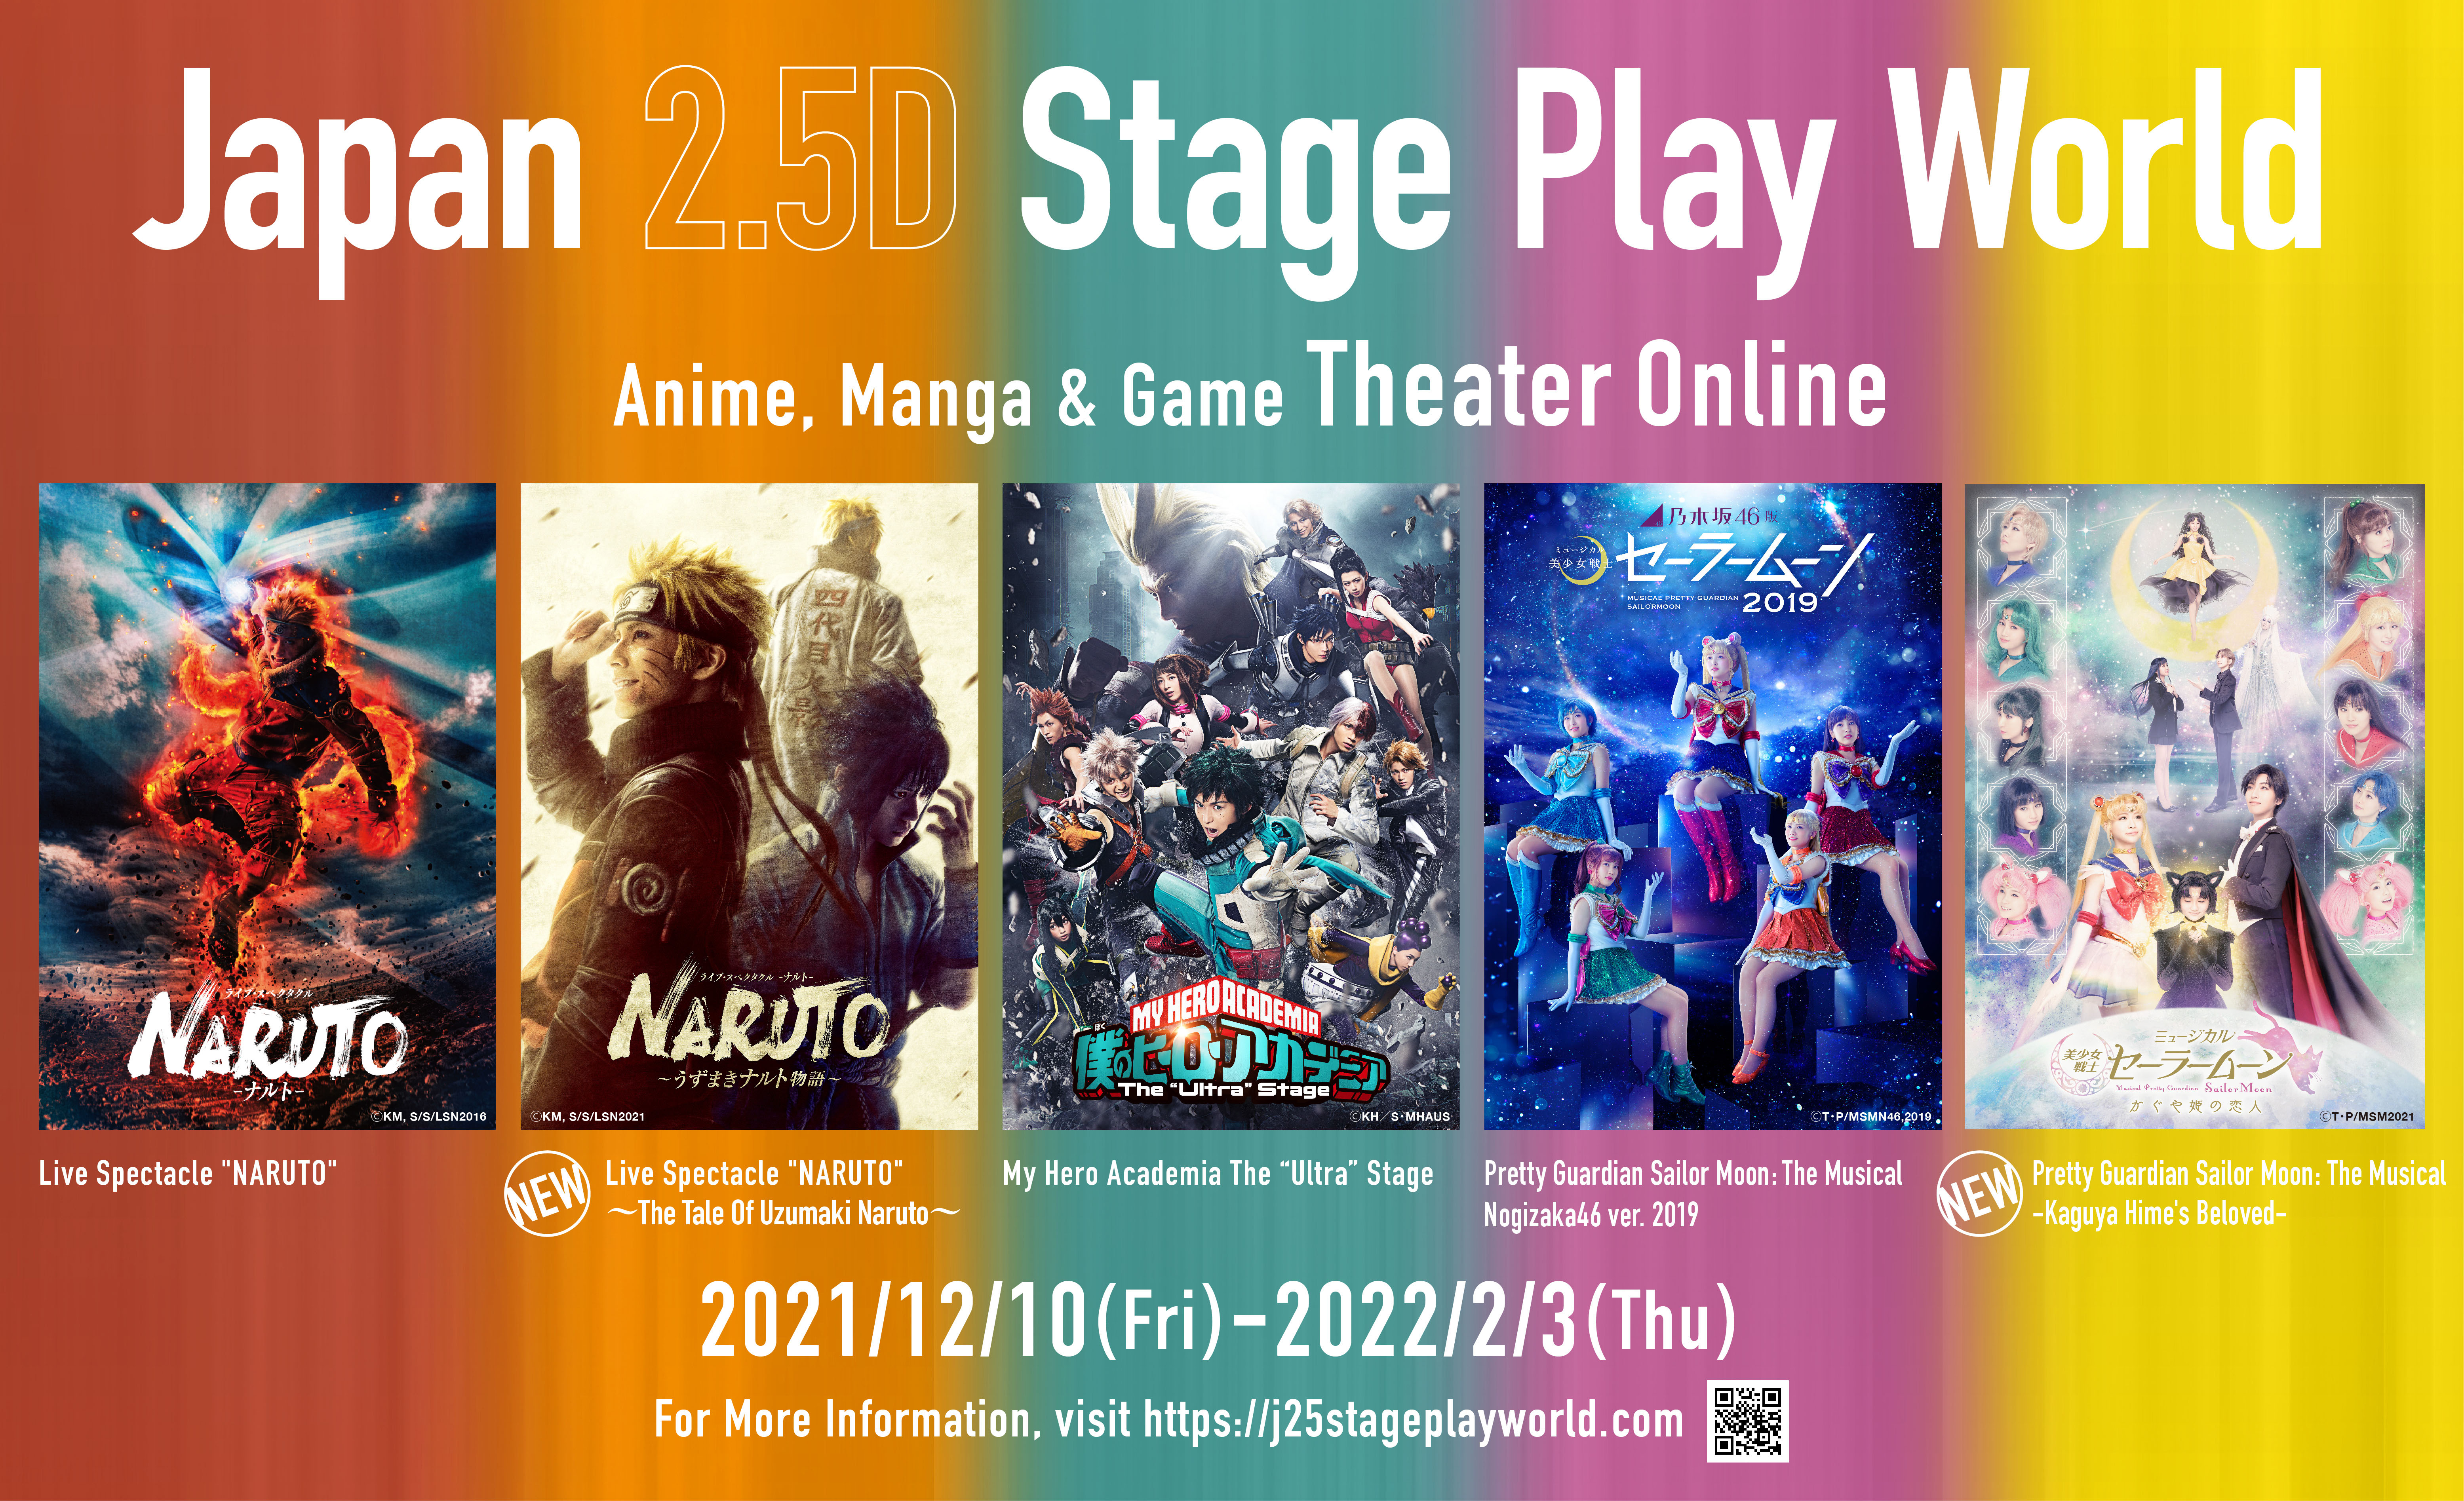 Japan 2.5D Stage Play World: Anime, Manga & Game Theater Online 開催！のサブ画像1_©Japan 2.5D Stage Play World Fest